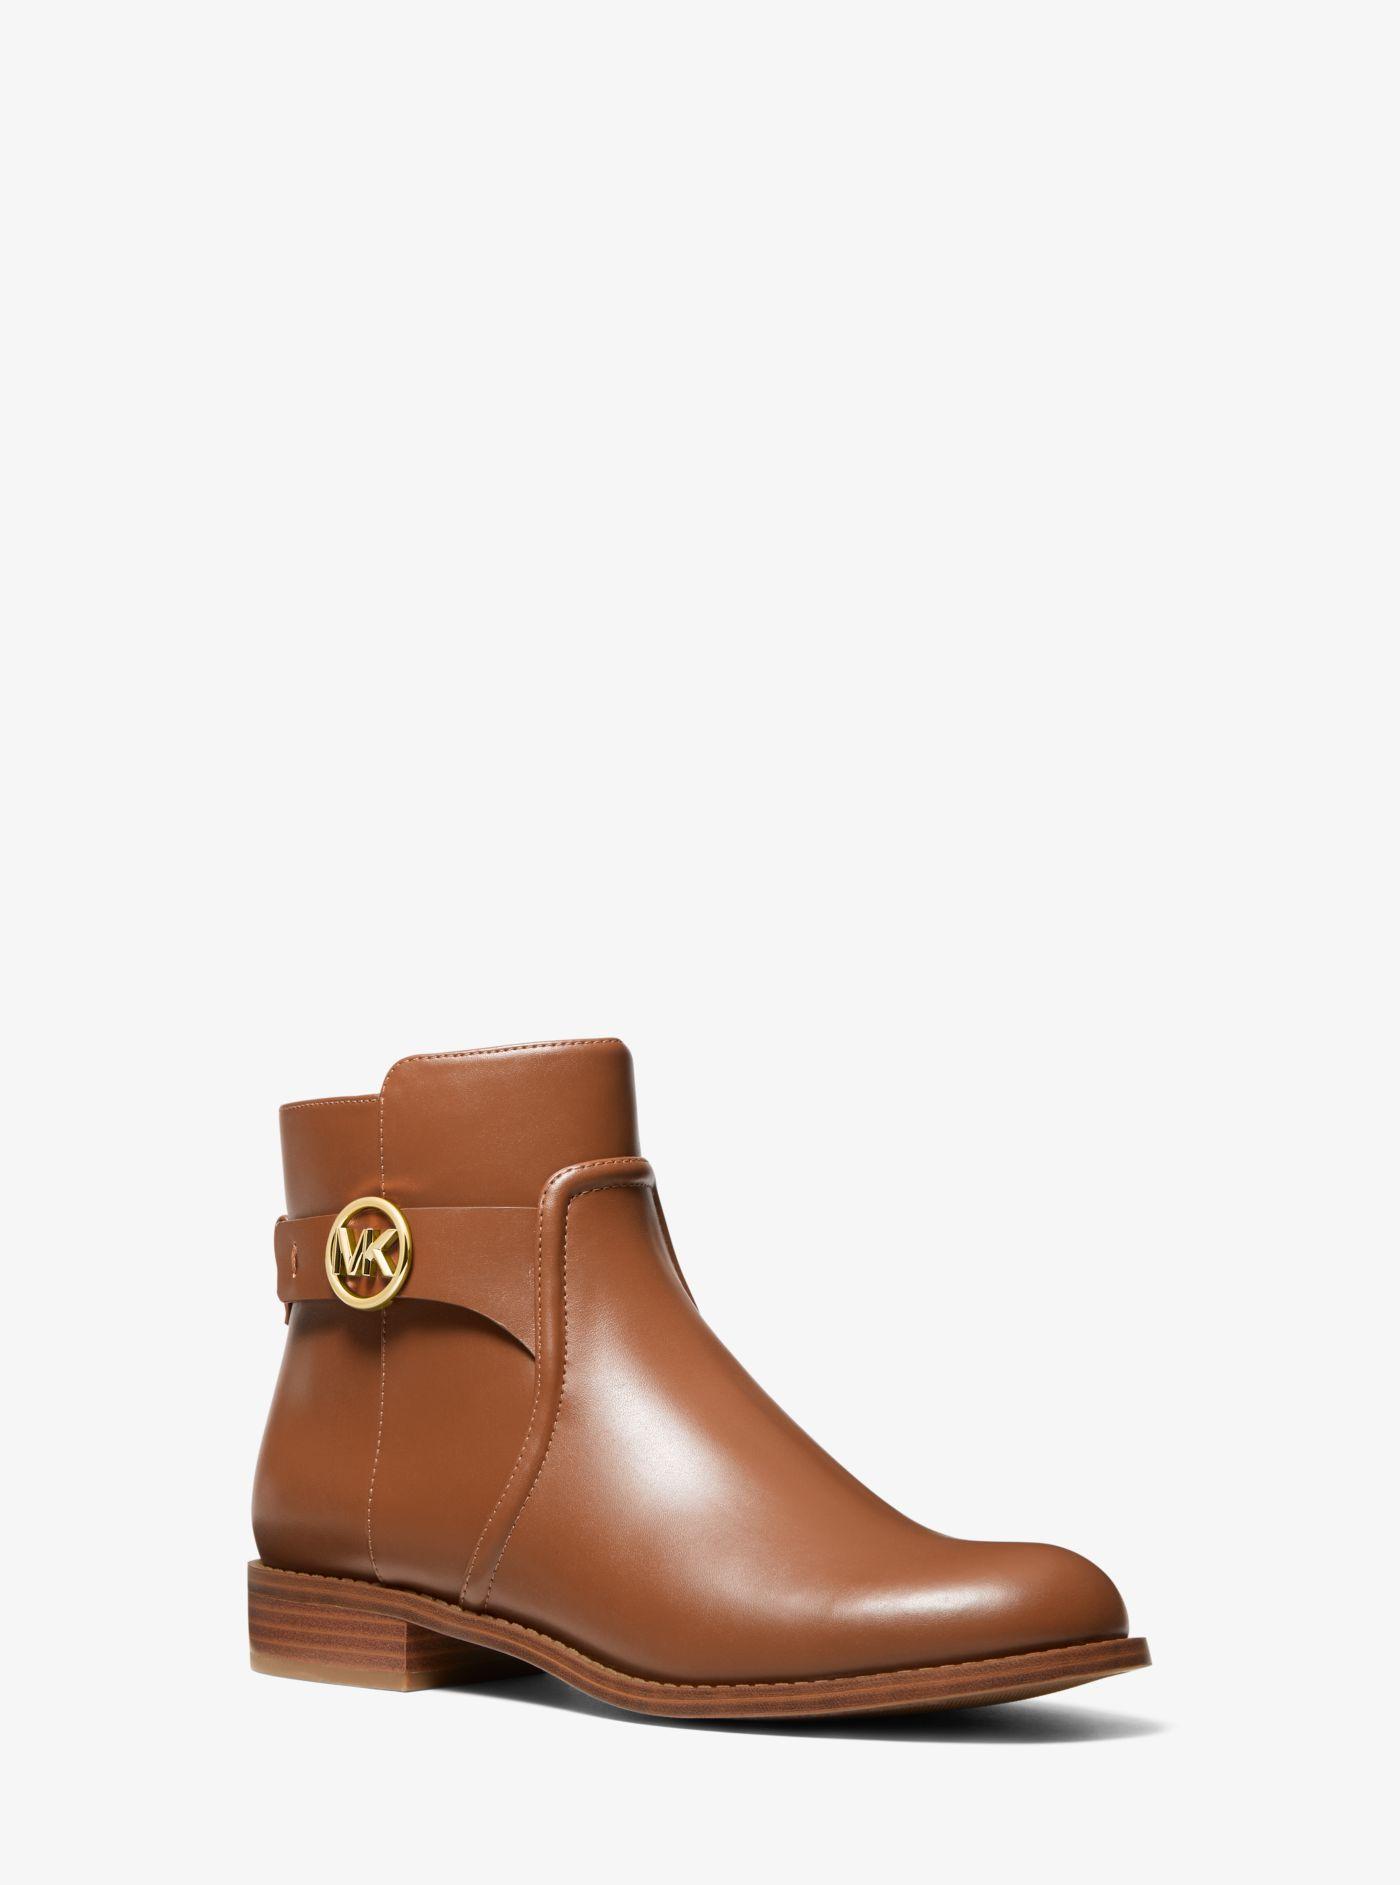 Michael Kors Carmen Faux Leather Ankle Boot in Brown | Lyst